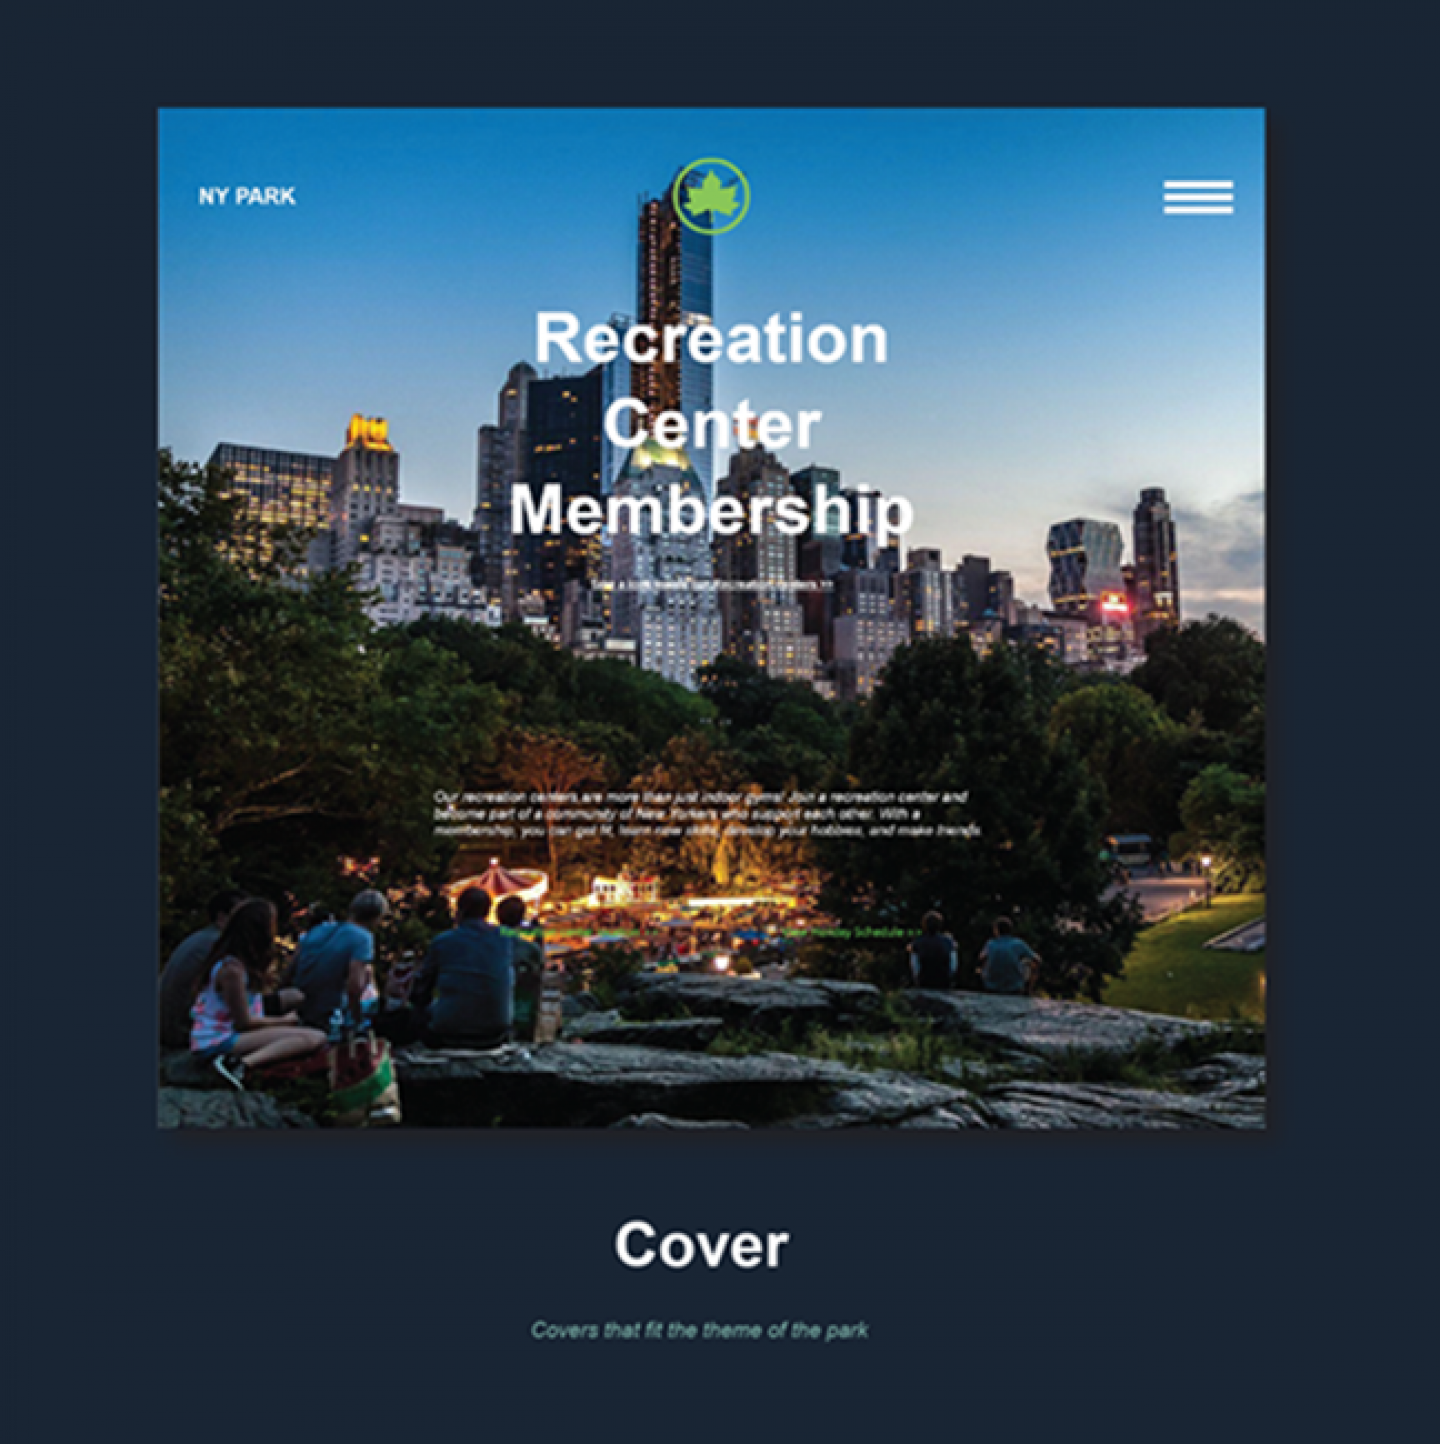 NY Park Webpage Redesign